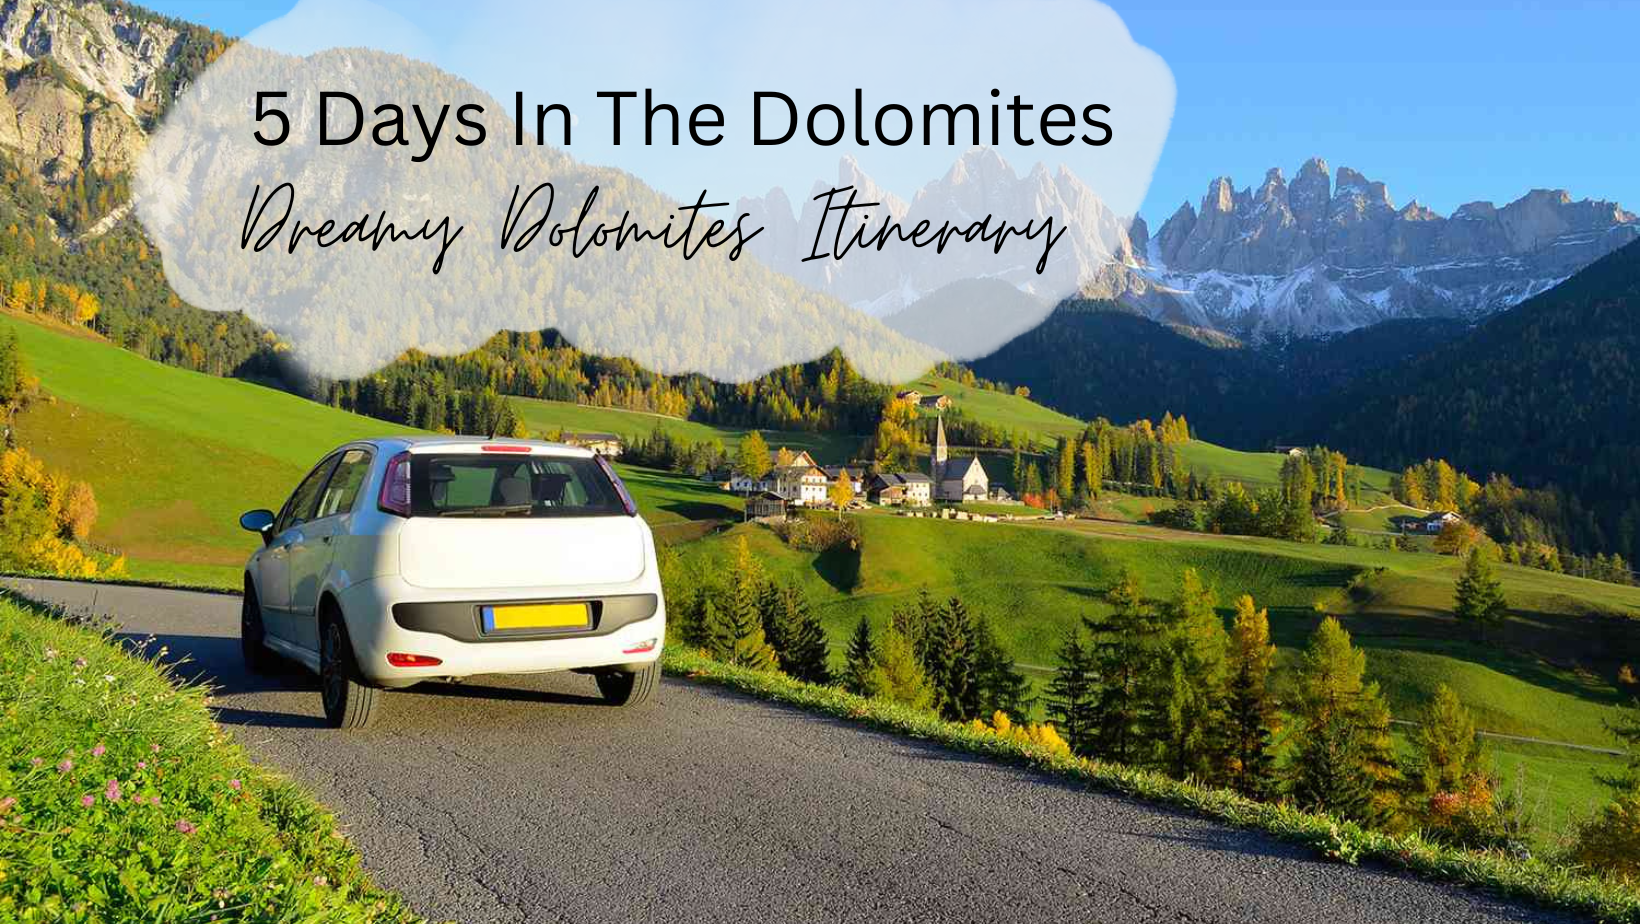 5 Days In The Dolomites- Dreamy Dolomites Itinerary